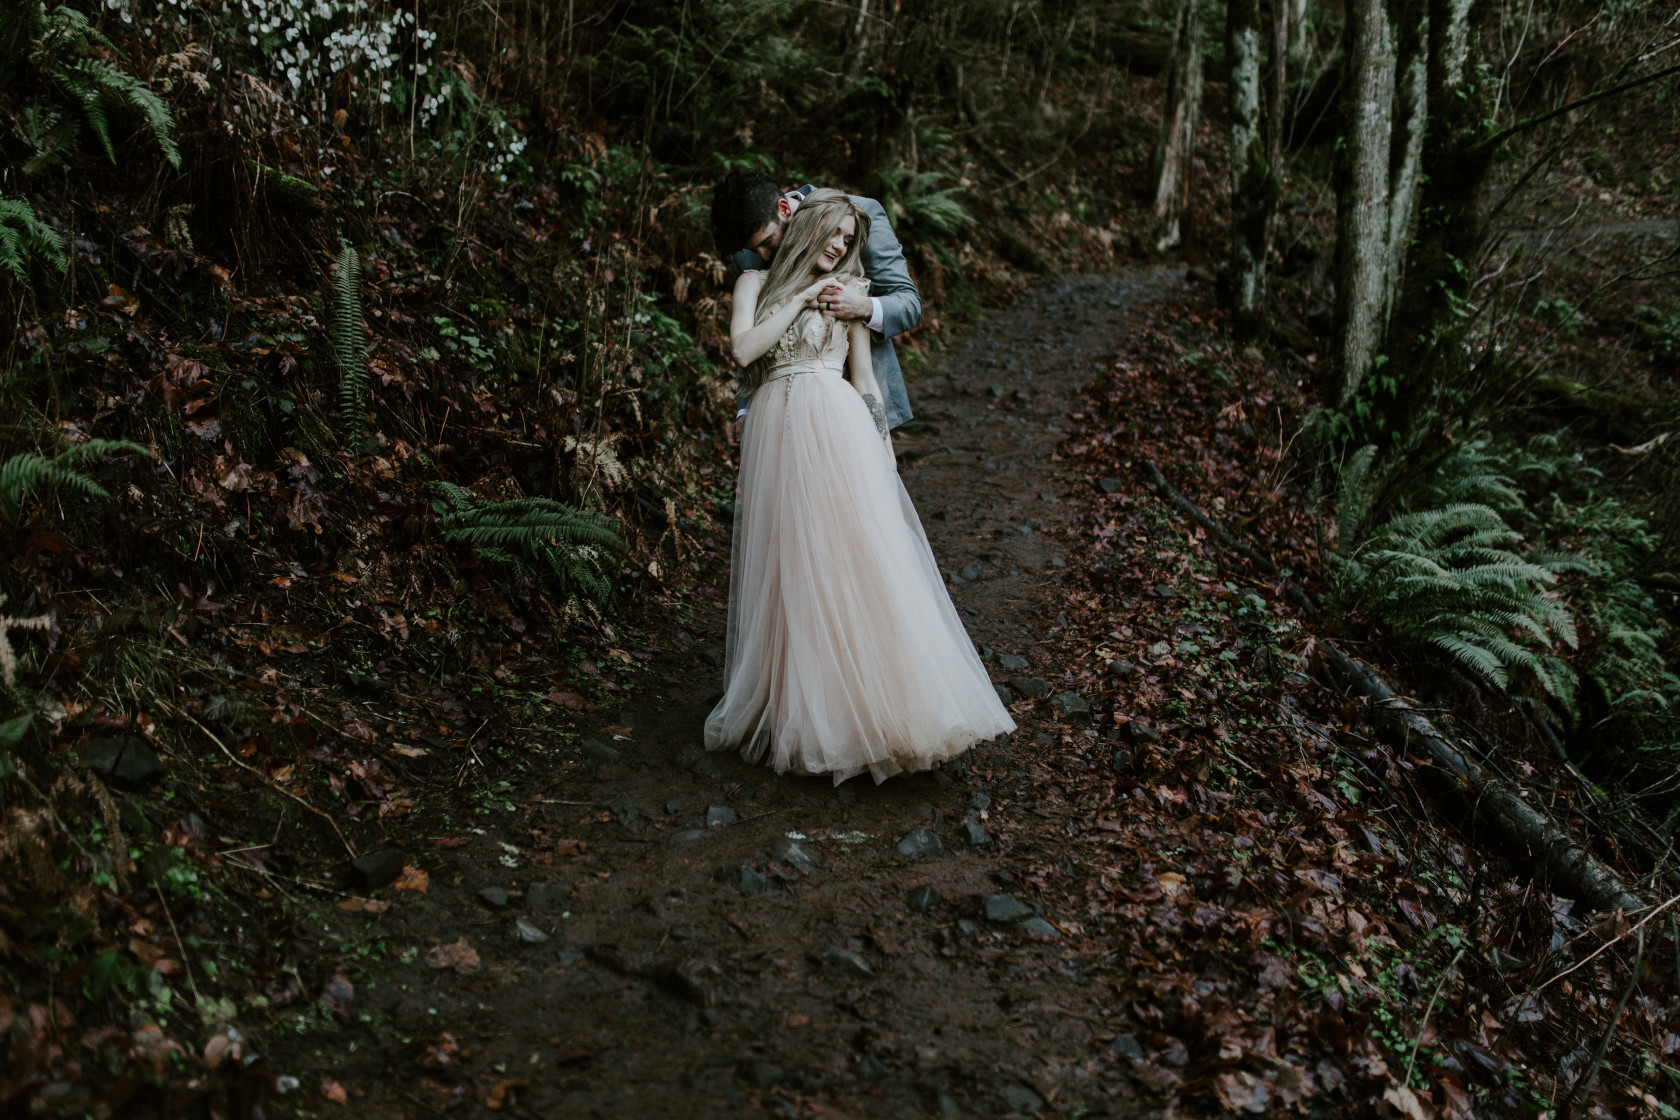 Boris holds Tyanna along the trail at Latourell Falls. Adventure elopement in the Columbia River Gorge by Sienna Plus Josh.